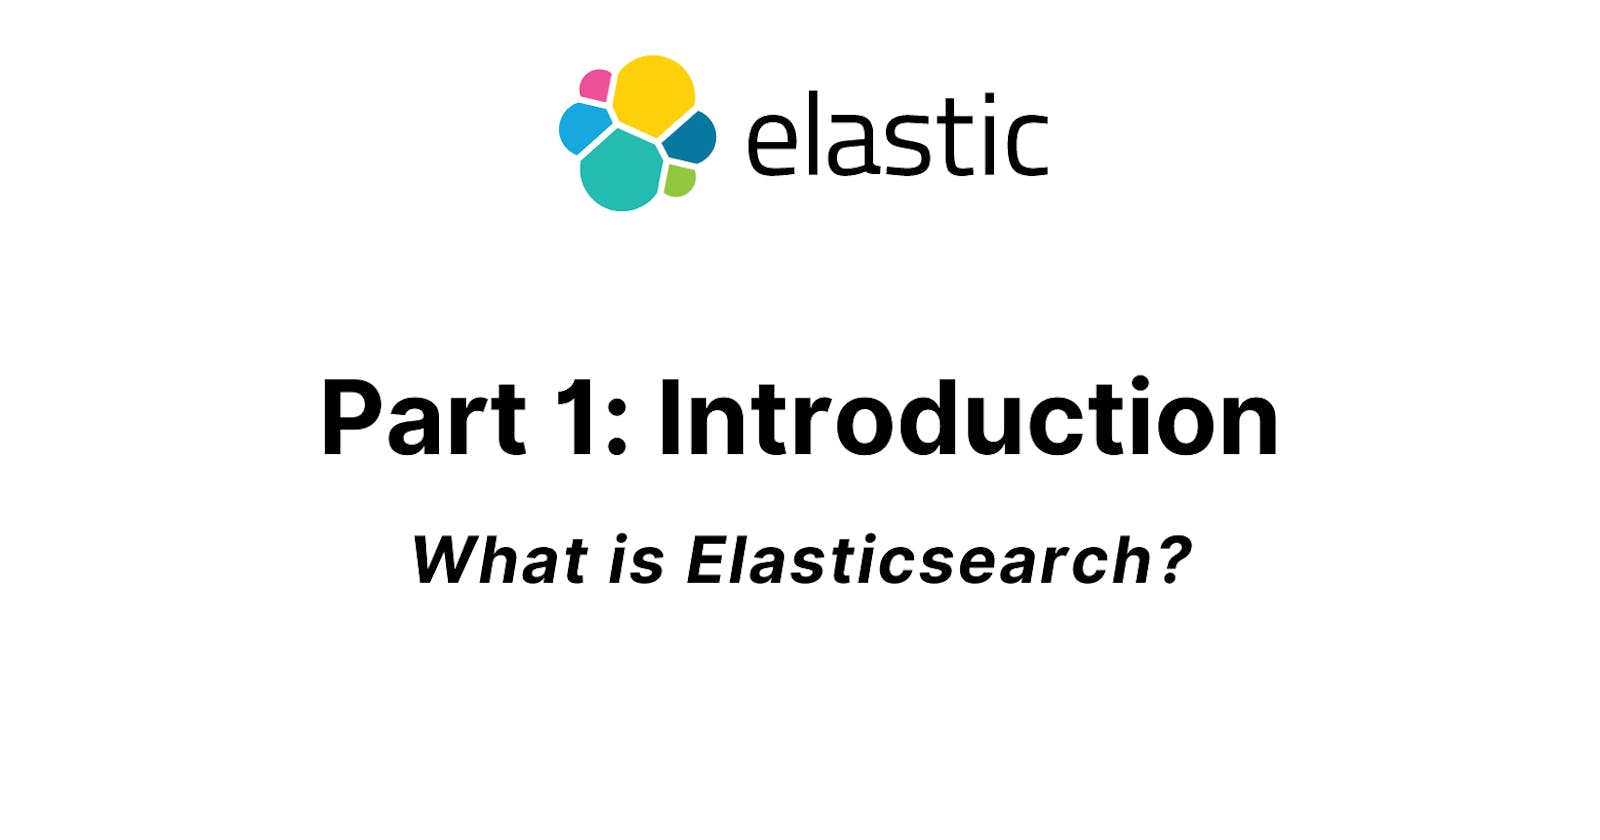 Part 1: Introduction to Elastic Search